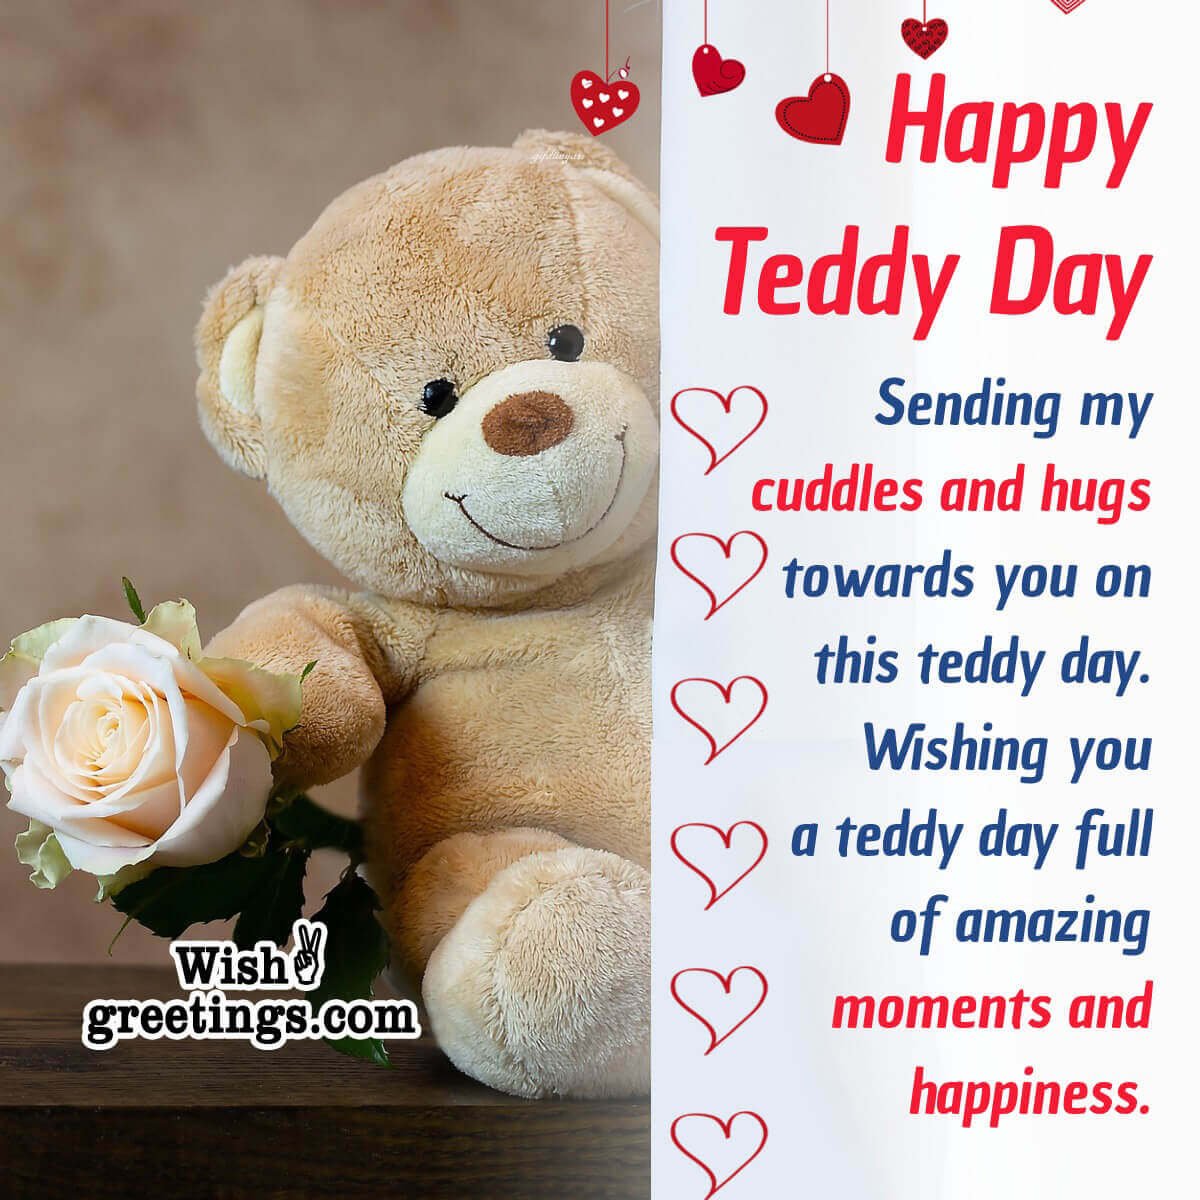 Happy Teddy Day Message Photo